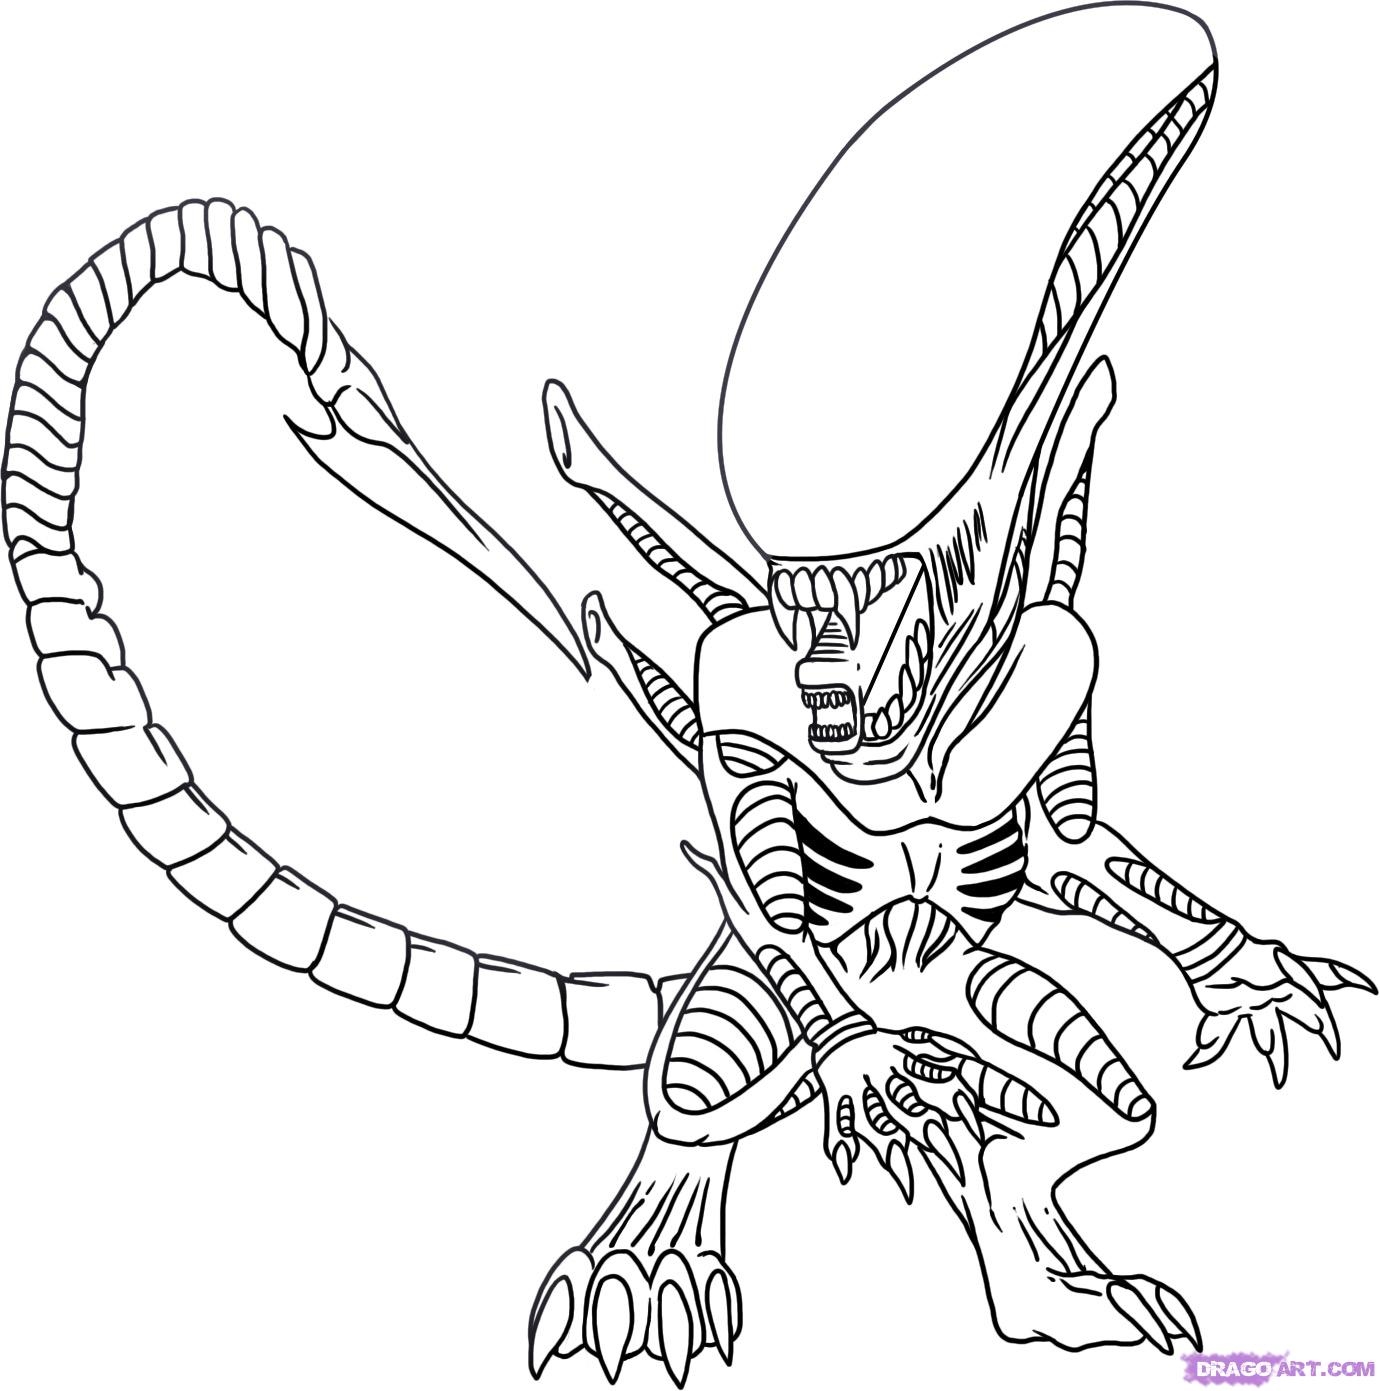 Xenomorph Coloring Pages at GetColoringscom Free